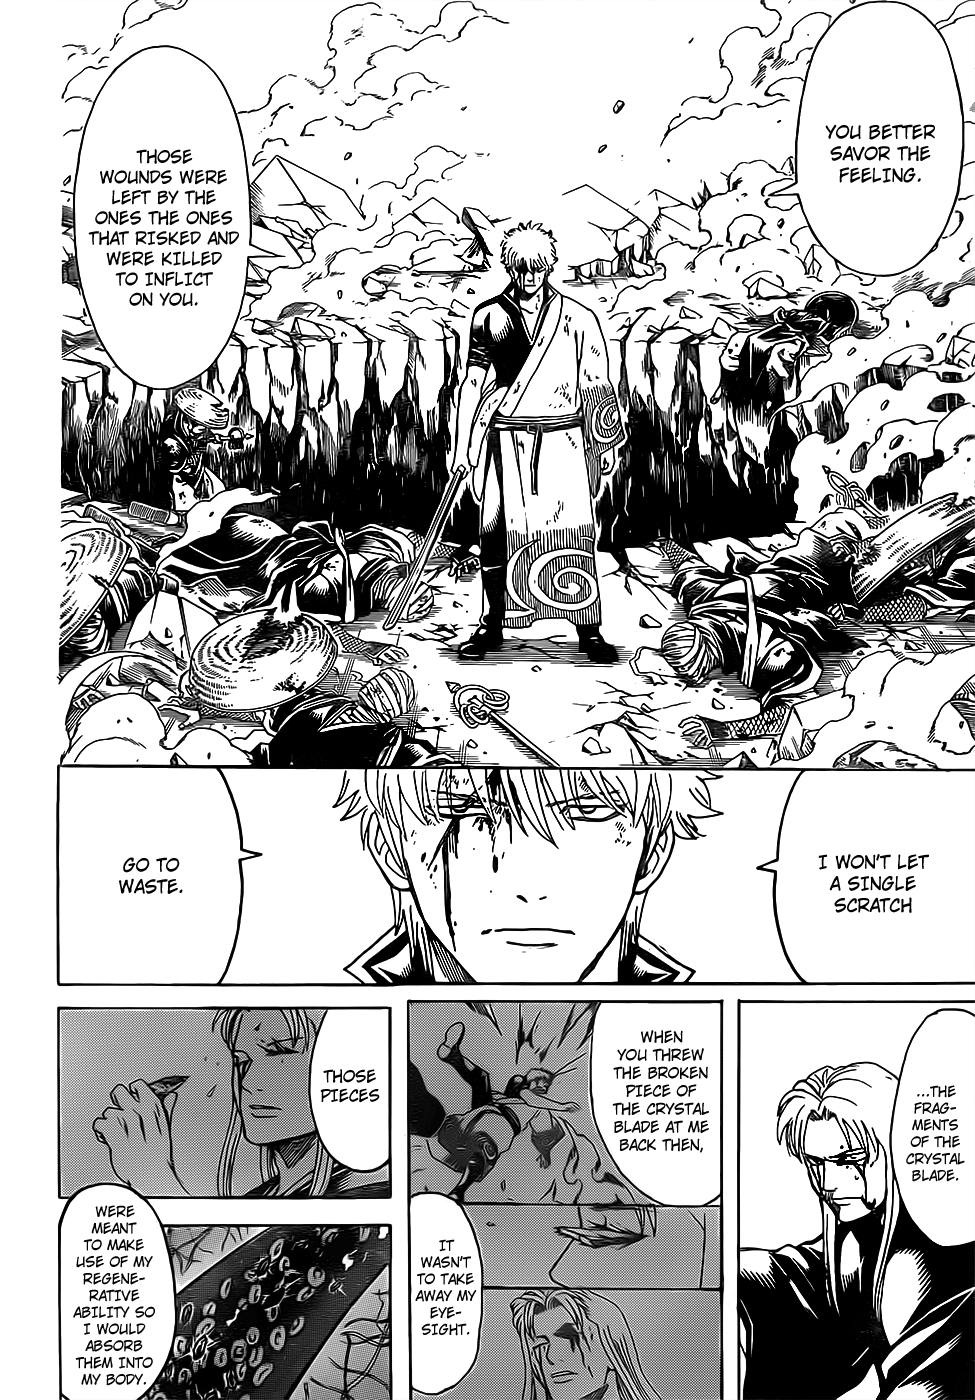 Gintama chapter 663 page 17